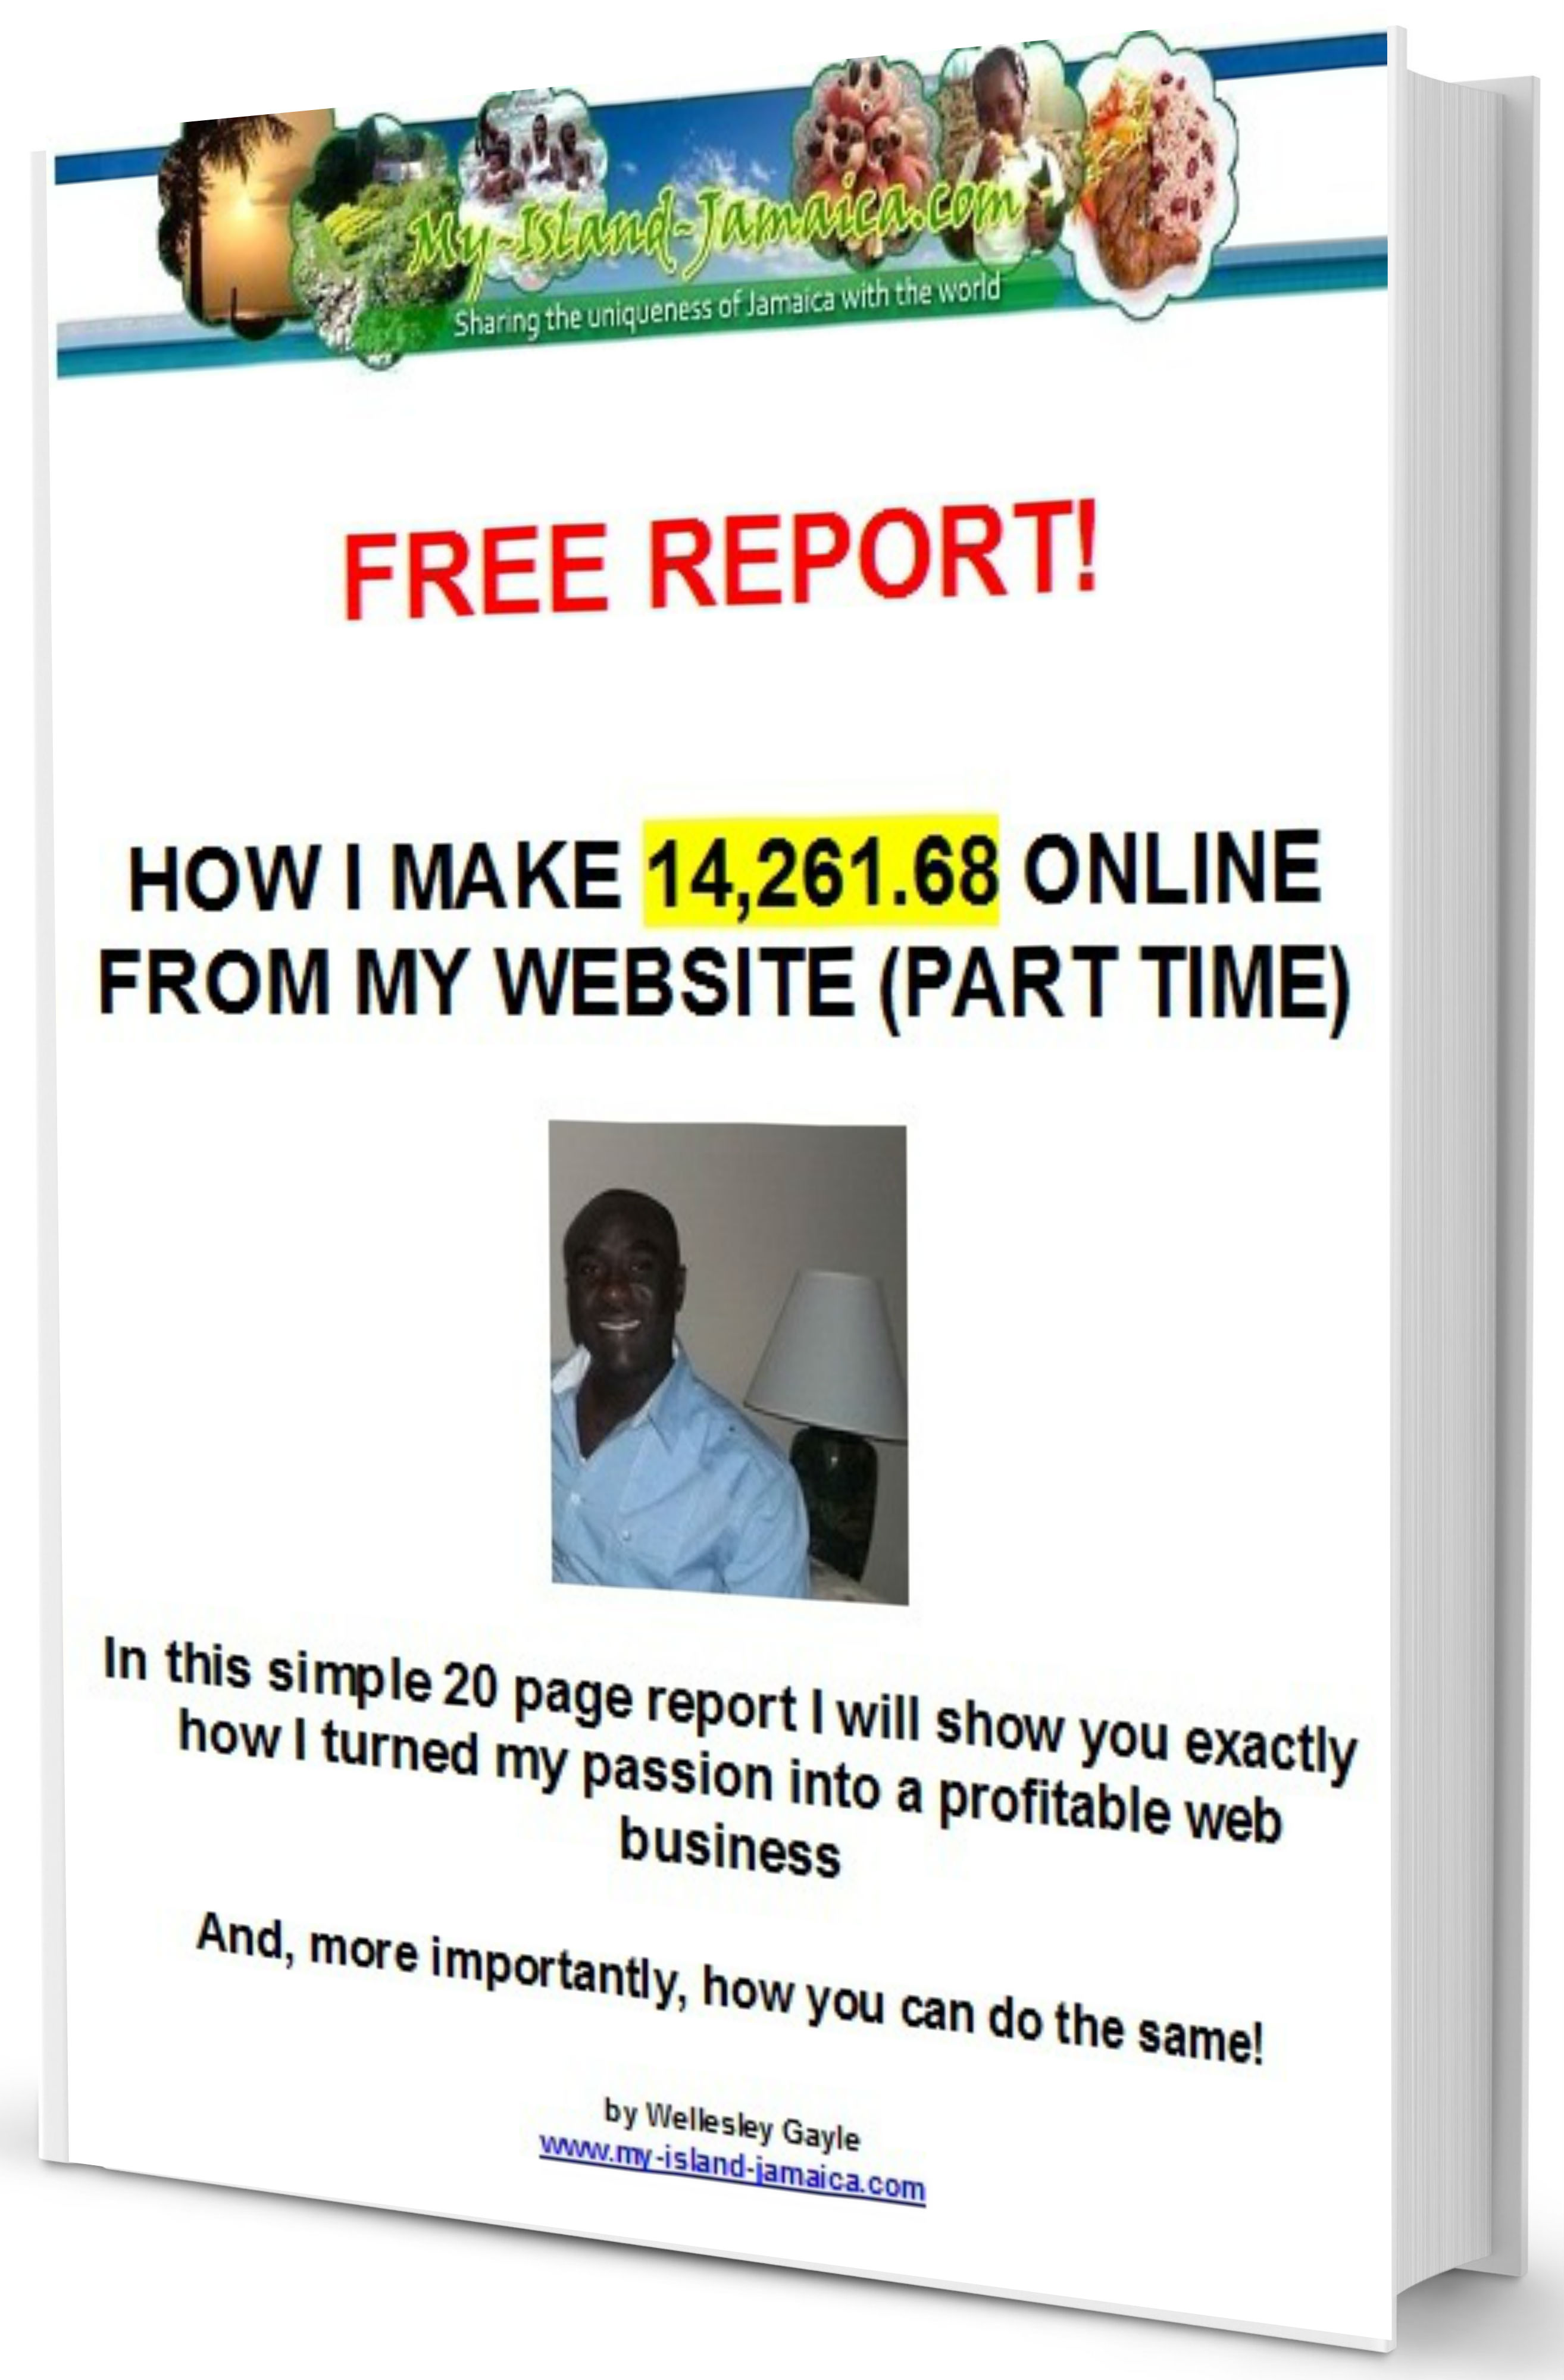 How do you post online job listings for free?